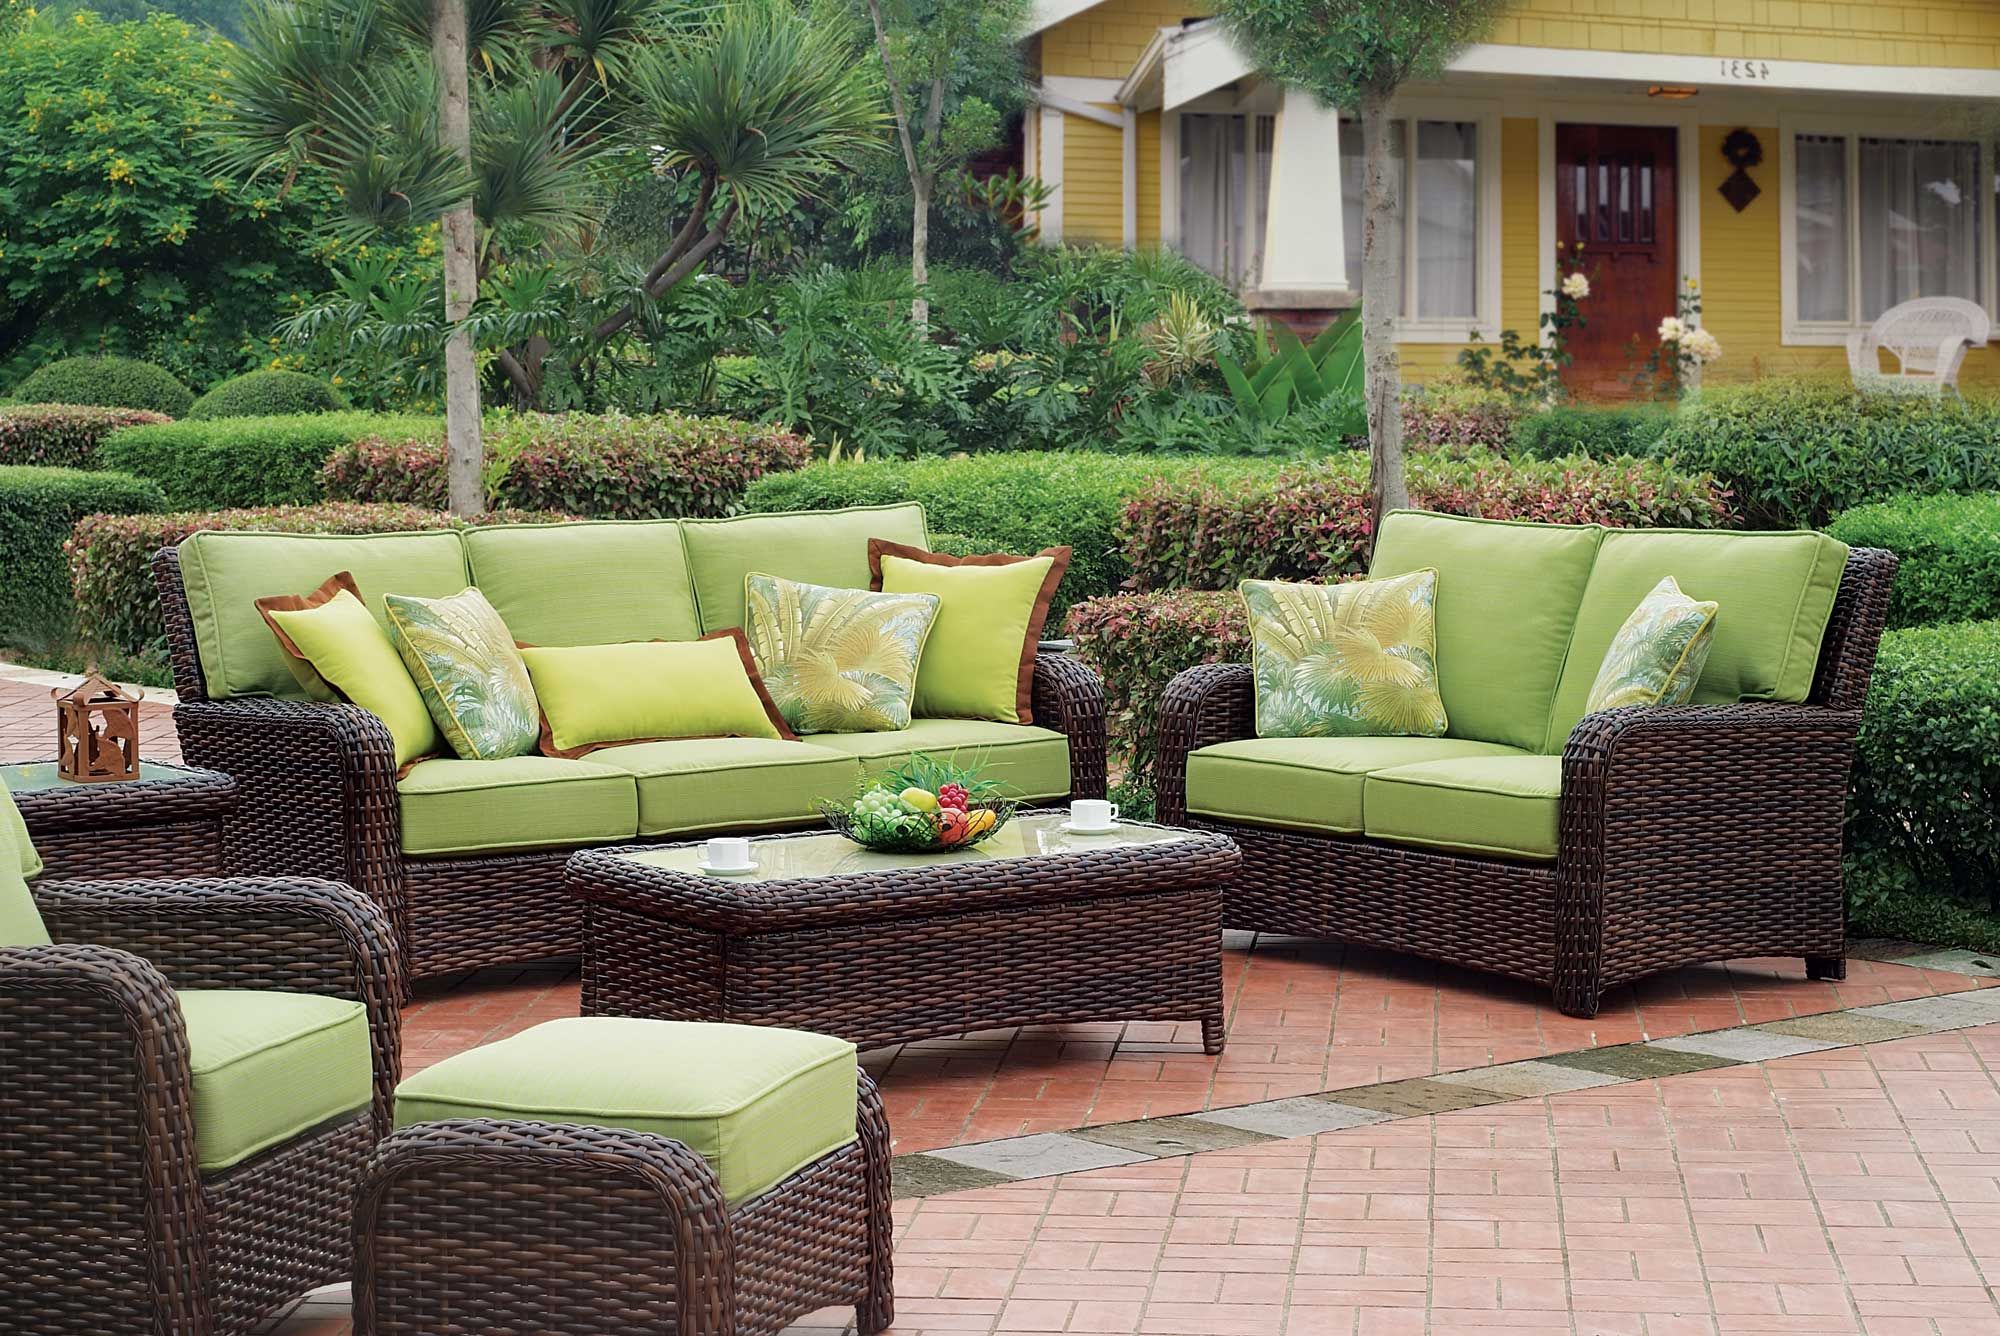 Outdoor Seating Sectional Patio Sets Regarding Most Current How To Opt Your Outdoor Living Space With Best Patio Furniture Brands (View 14 of 15)